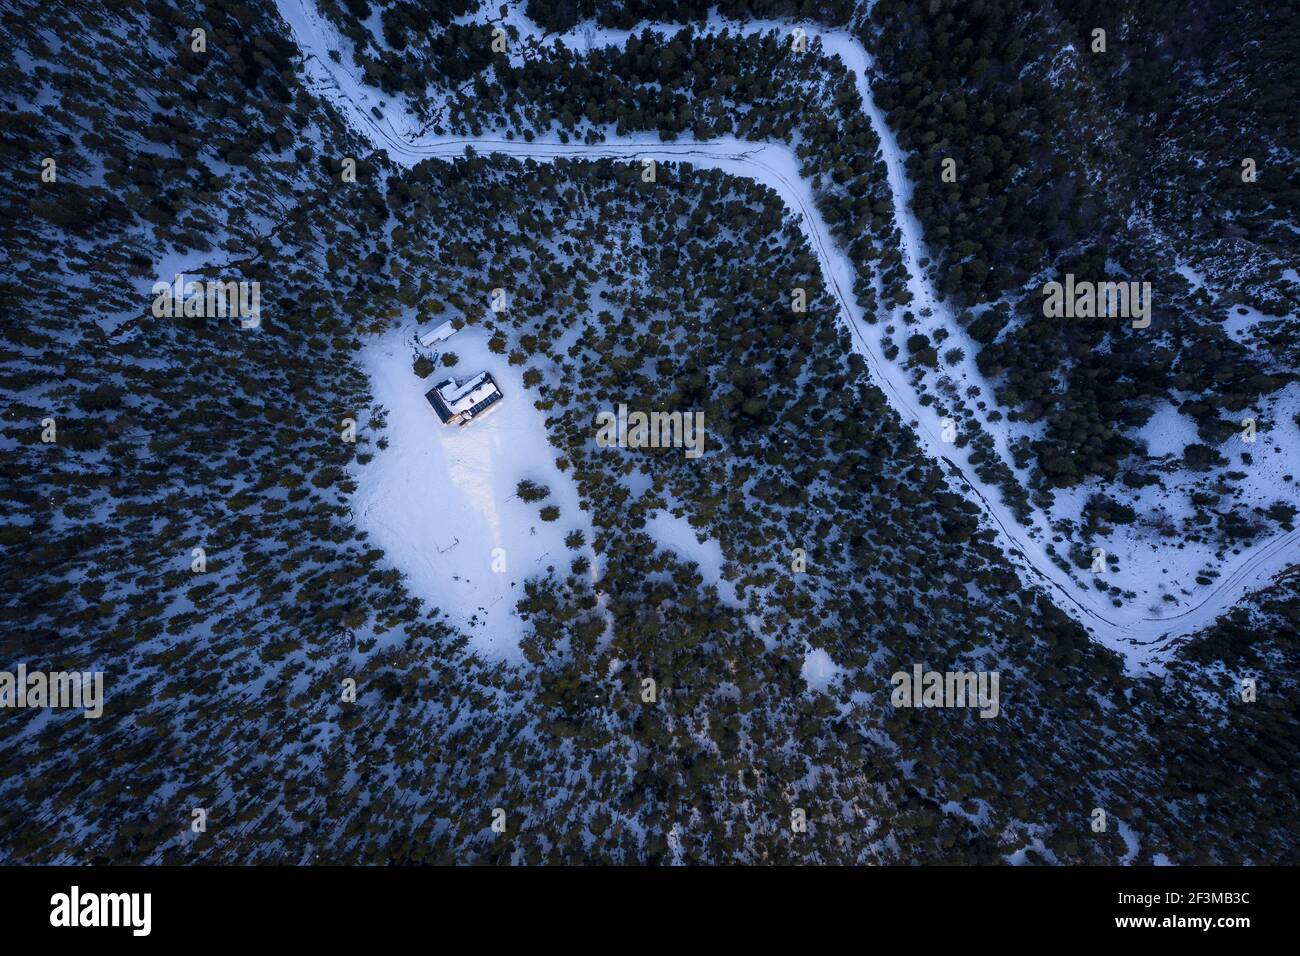 Overhead aerial view of Lluís Estasen mountain hut after a winter snowfall in a cloudy day (Barcelona province, Catalonia, Spain, Pyrenees) Stock Photo